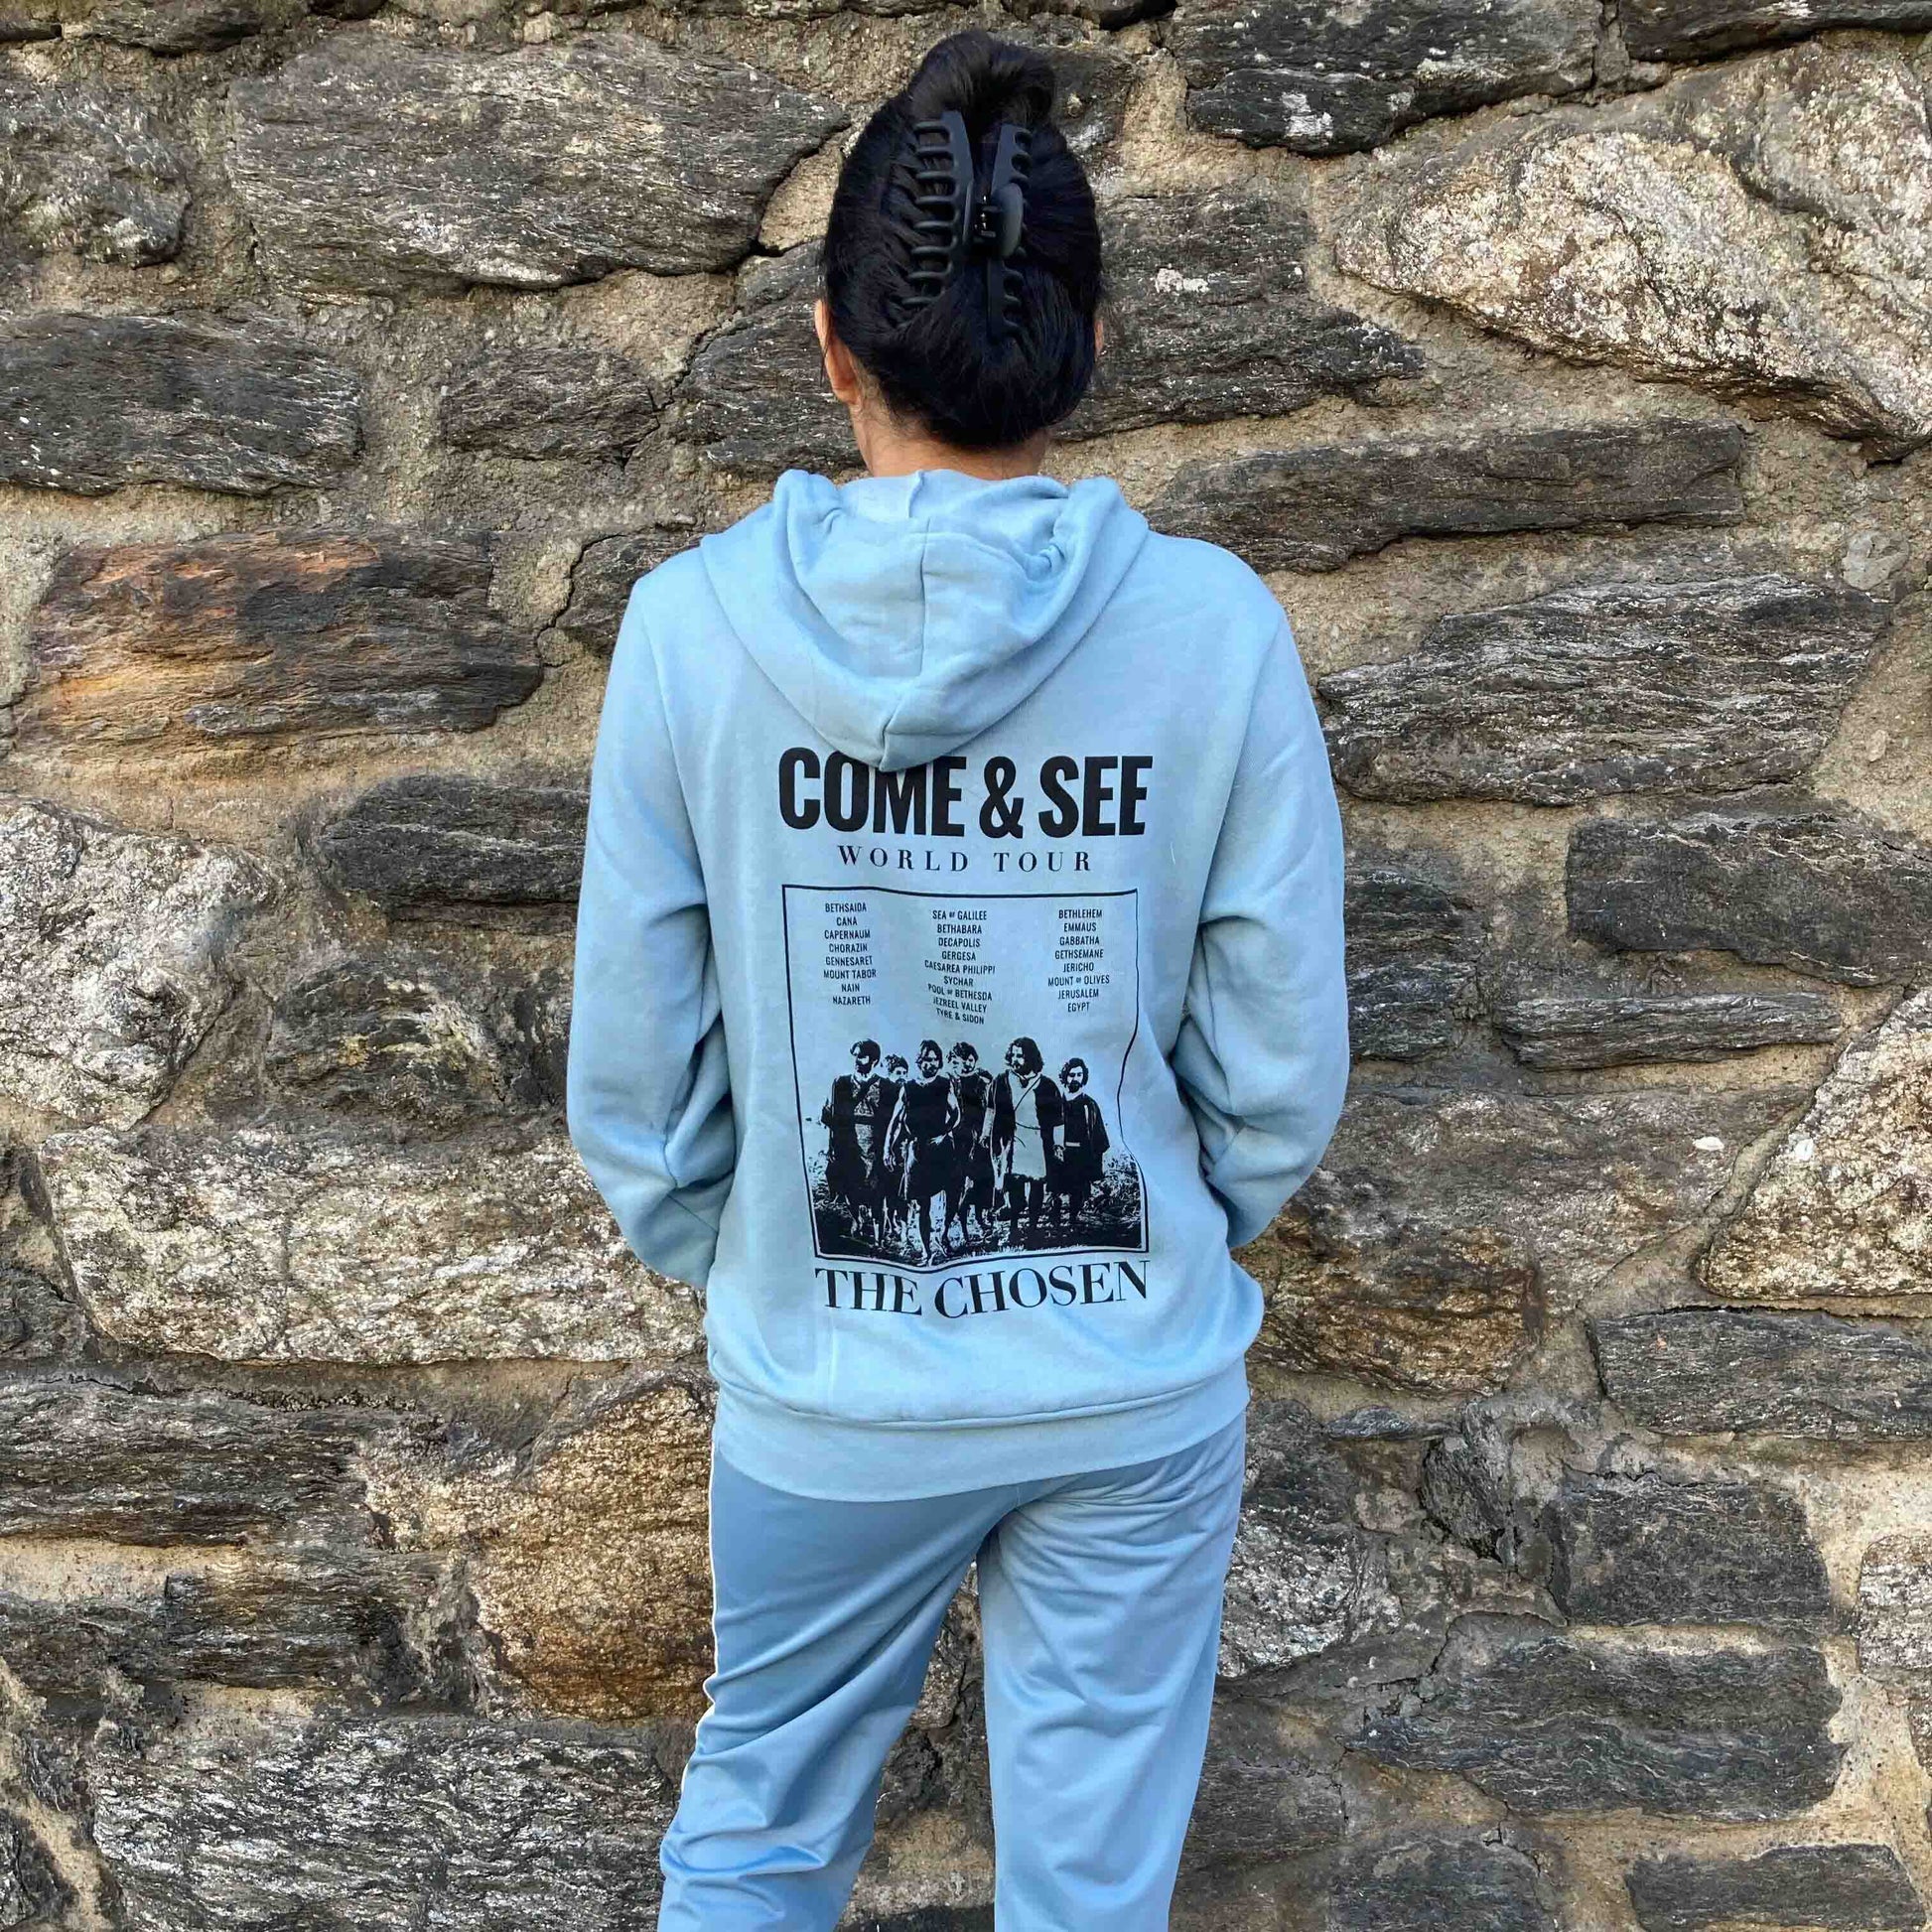 Unfiltered: "Come & See World Tour" Hoodie Back